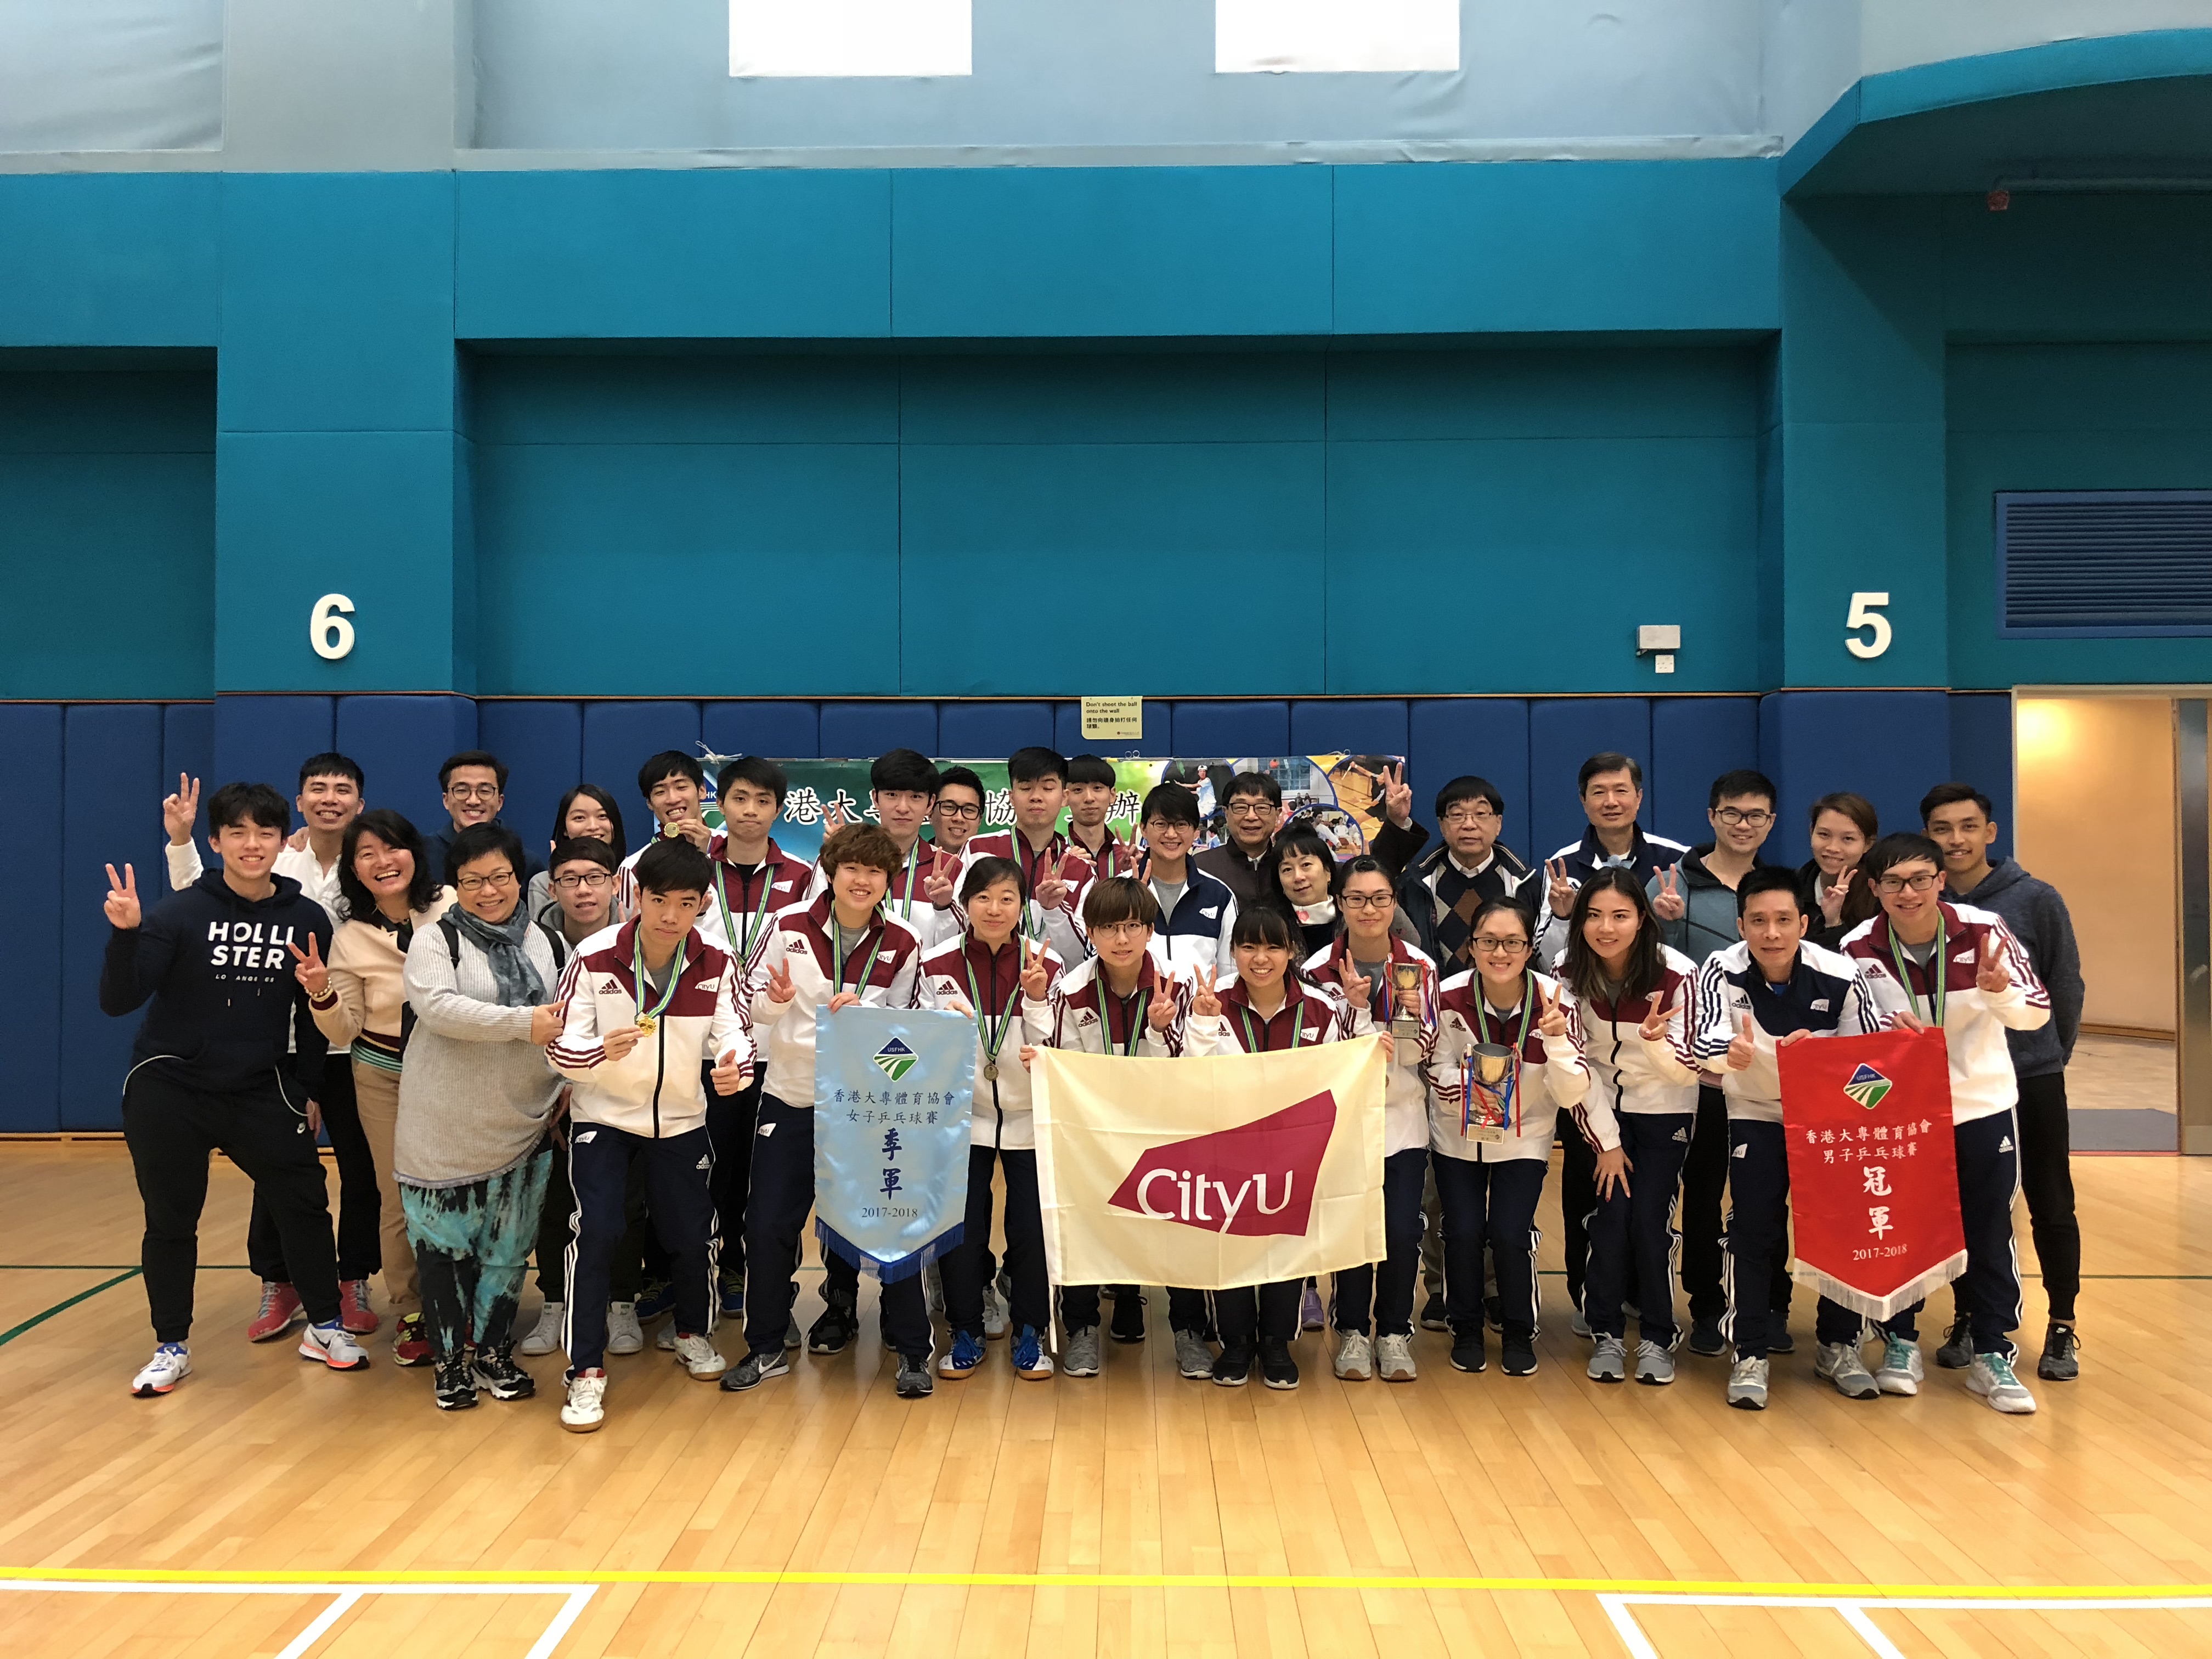 CityU men and women’s table tennis teams won the champion and 2nd runner up respectively in the table tennis competition organised by the USFHK in 2018.